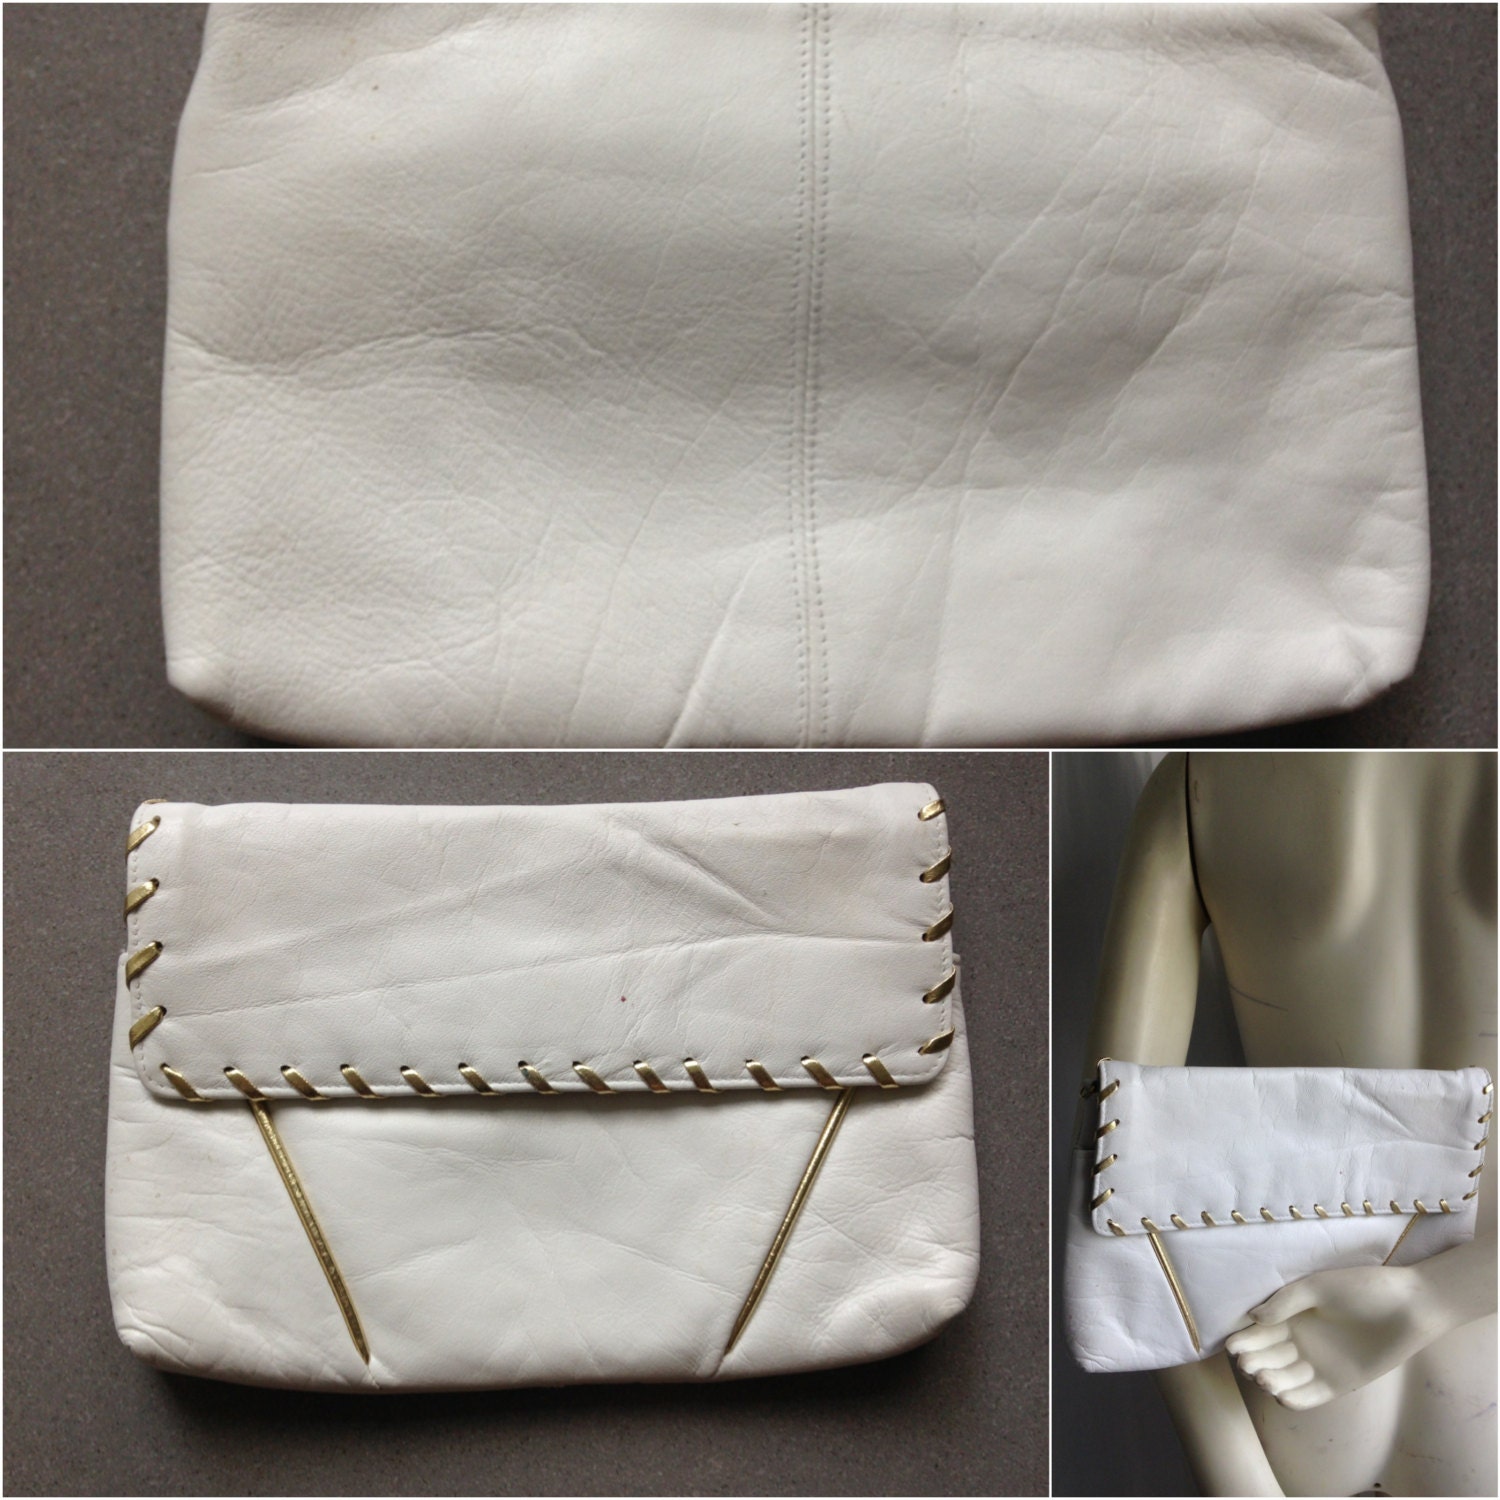 Vintage ANDE WHITE Leather Clutch Purse Evening BAG 1980s Gold